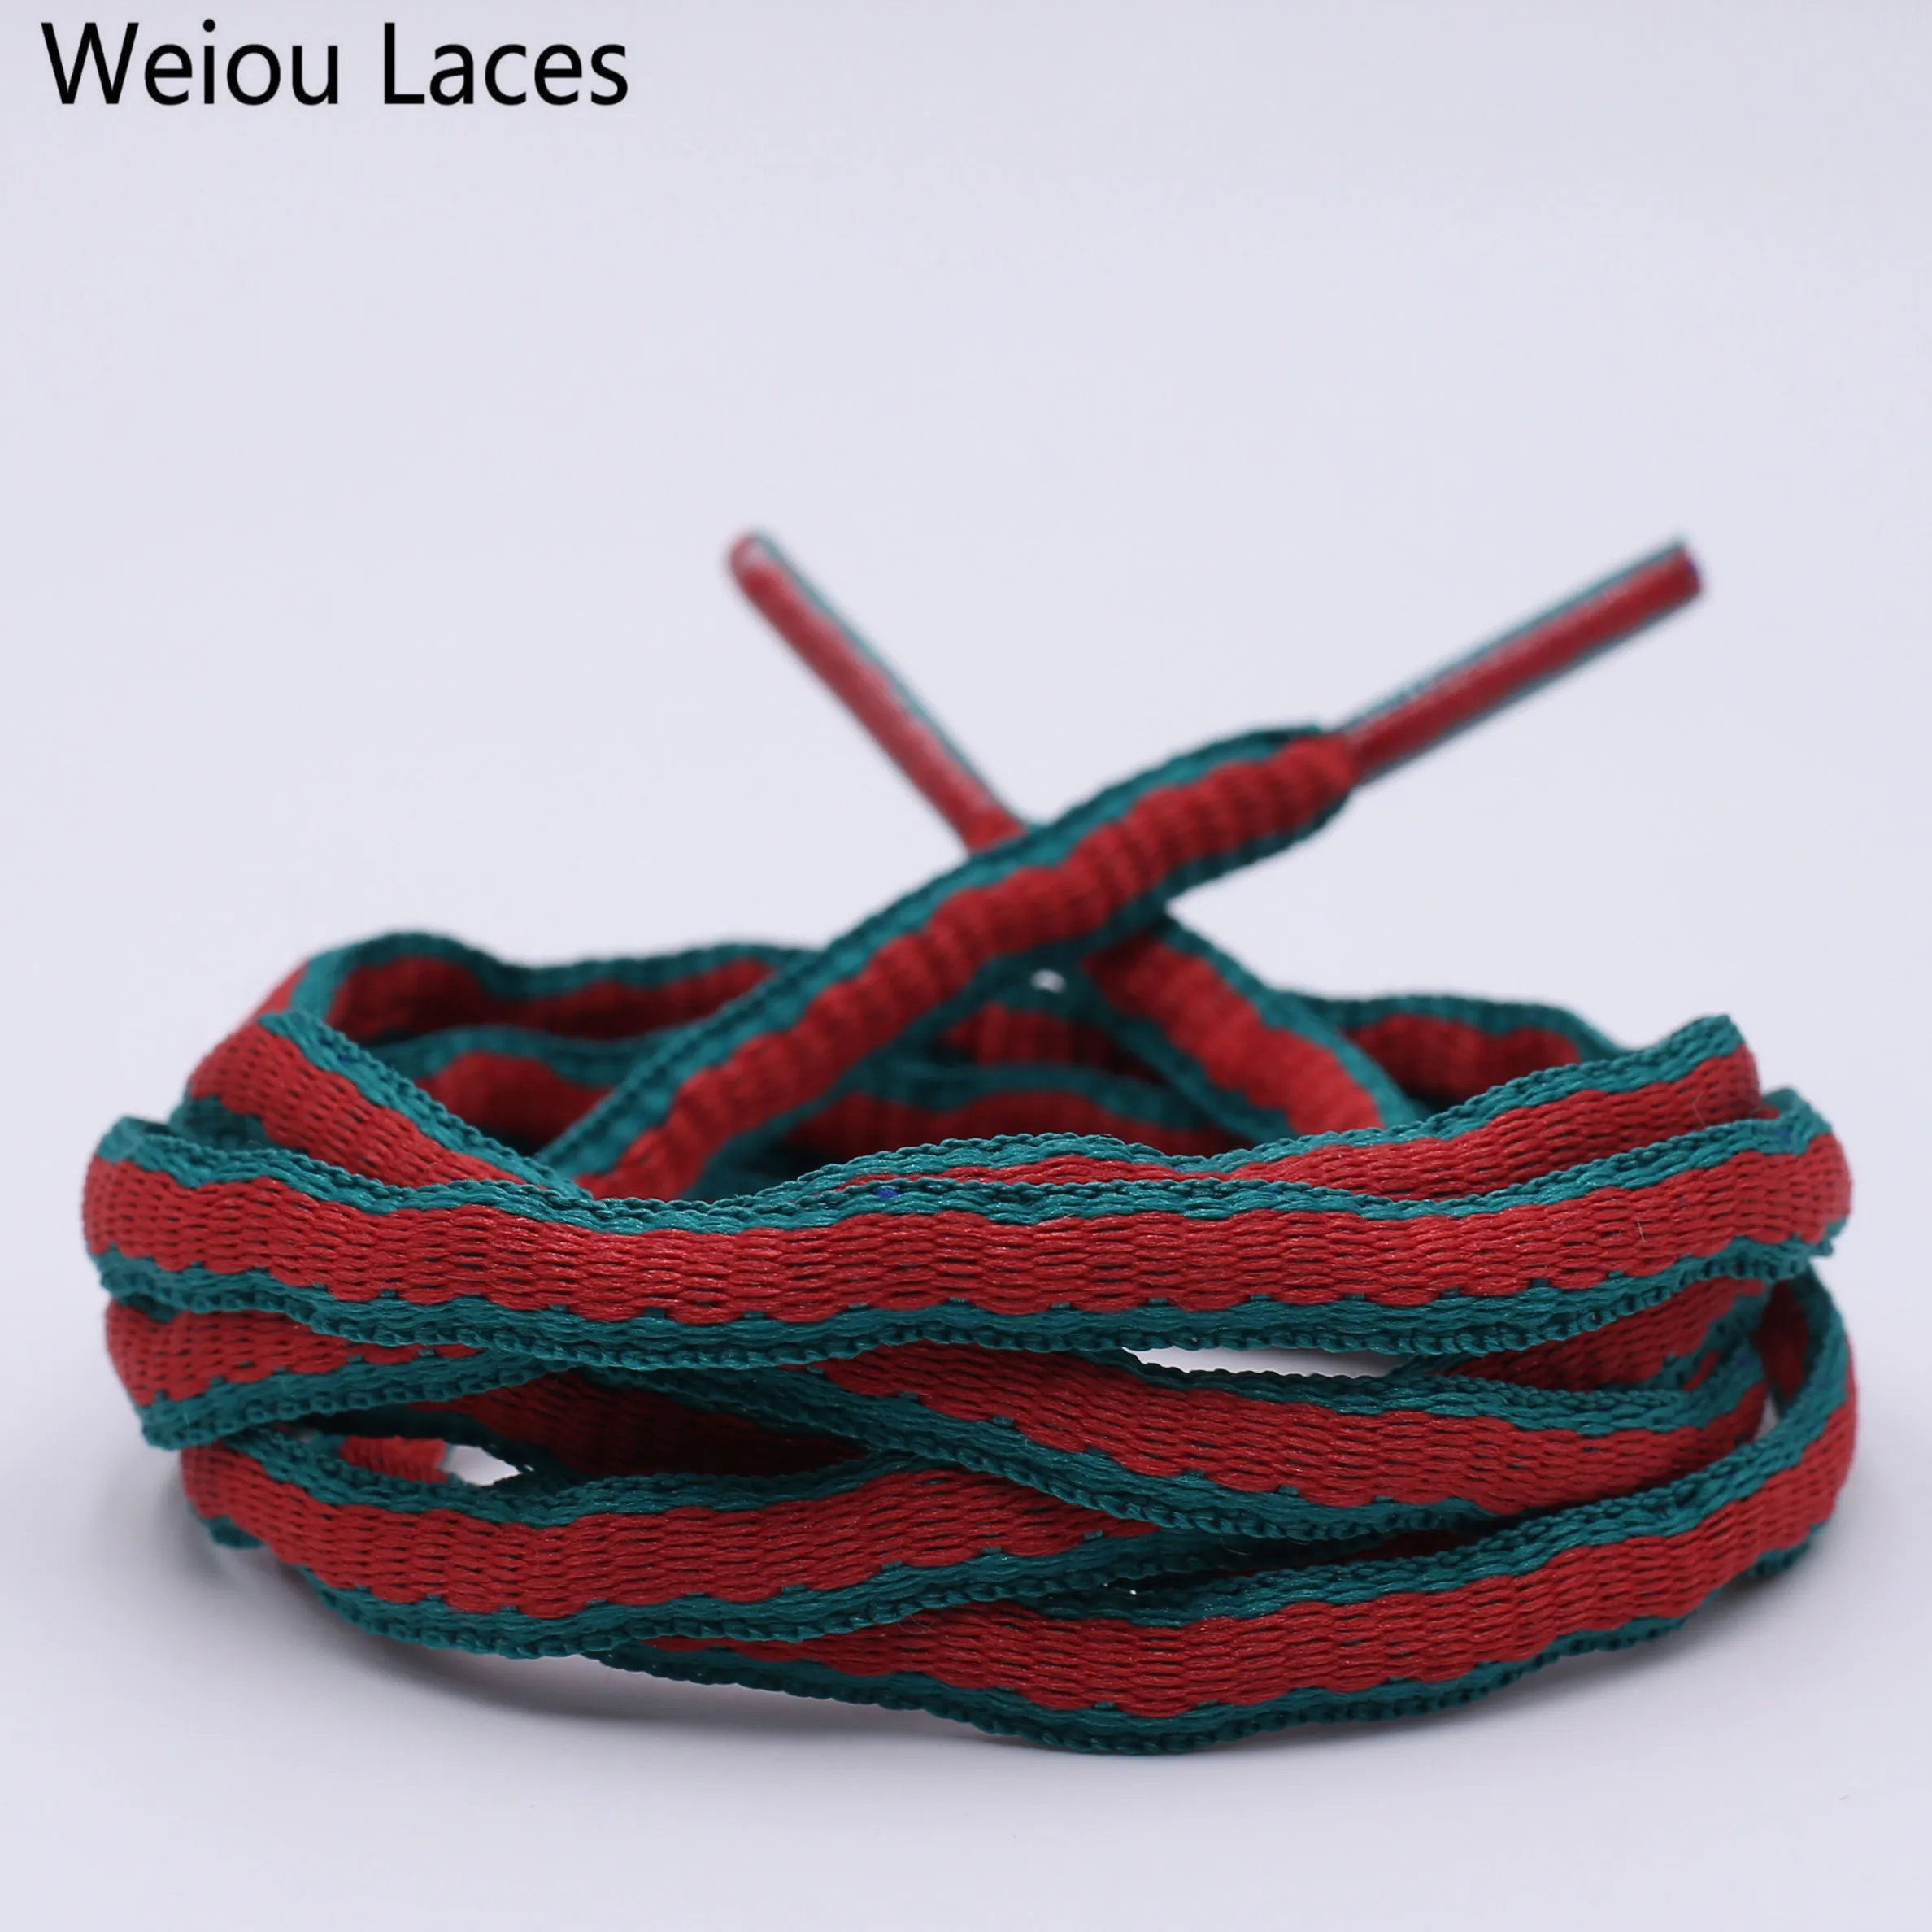 

Weiou laces Oval Green Red Two Toned Shoelaces Polyester Semicircular Laces Fashion Shoestrings Plastic Tips For Shoes Sneakers, Green-red,support customized color